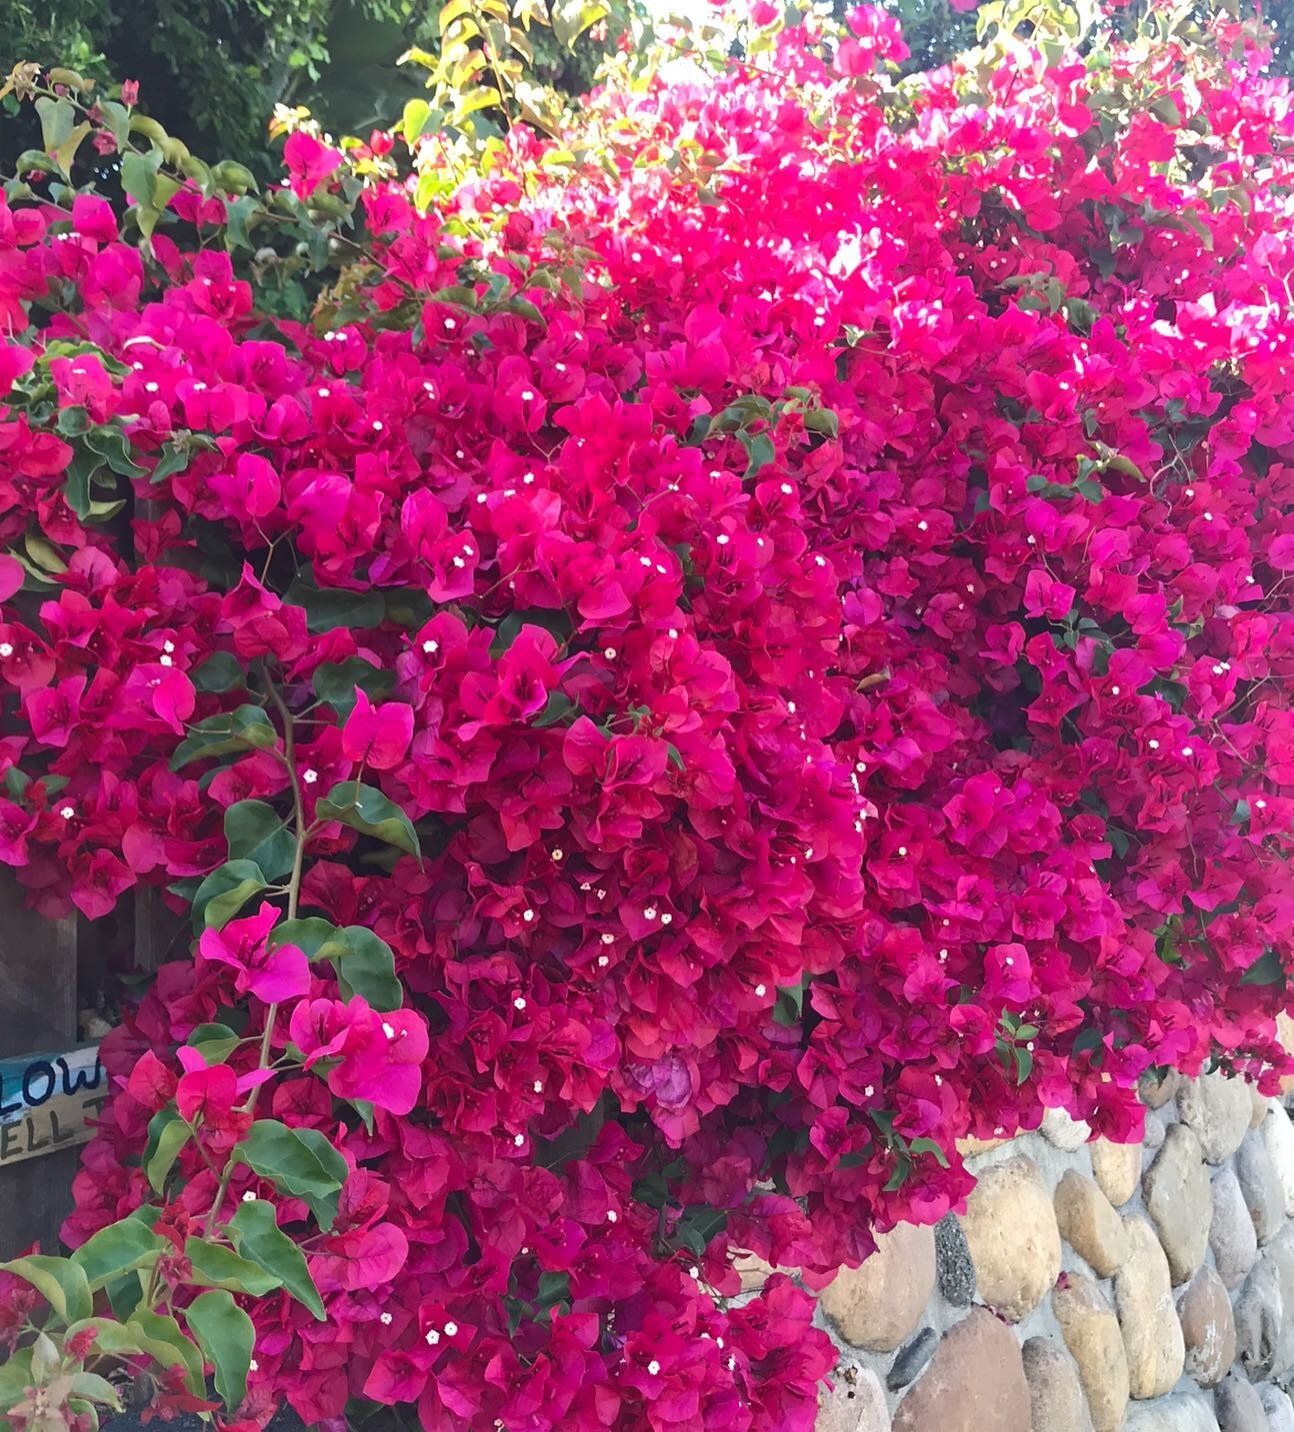 Peace lives
in the dappled sun&nbsp;
under the bougainvillea.
I can always find it there.
I found it once
reading a book against a stone wall&nbsp;
in Mexico City.
The bougainvillea watched from above.
Even today,
the ever-beaming bush
down the stree